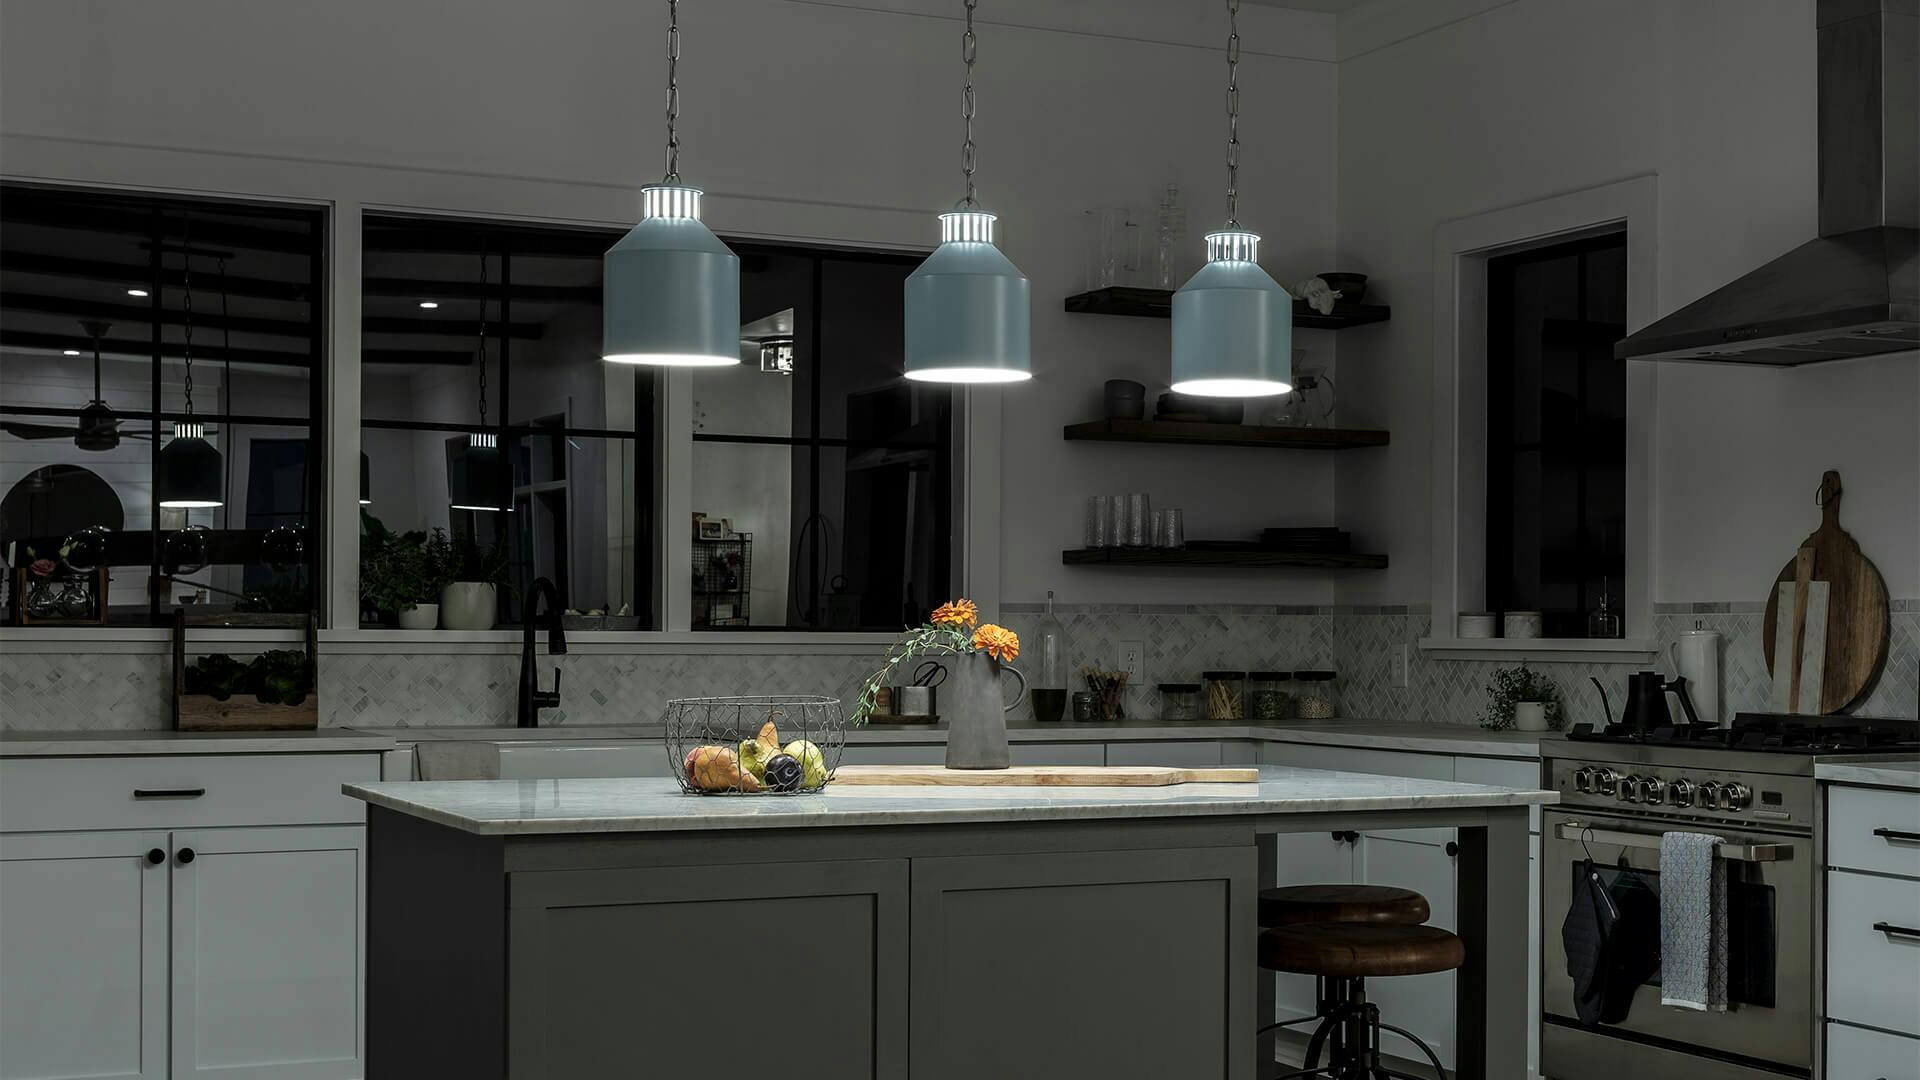 A dimly lit kitchen with three pendants glowing above the island